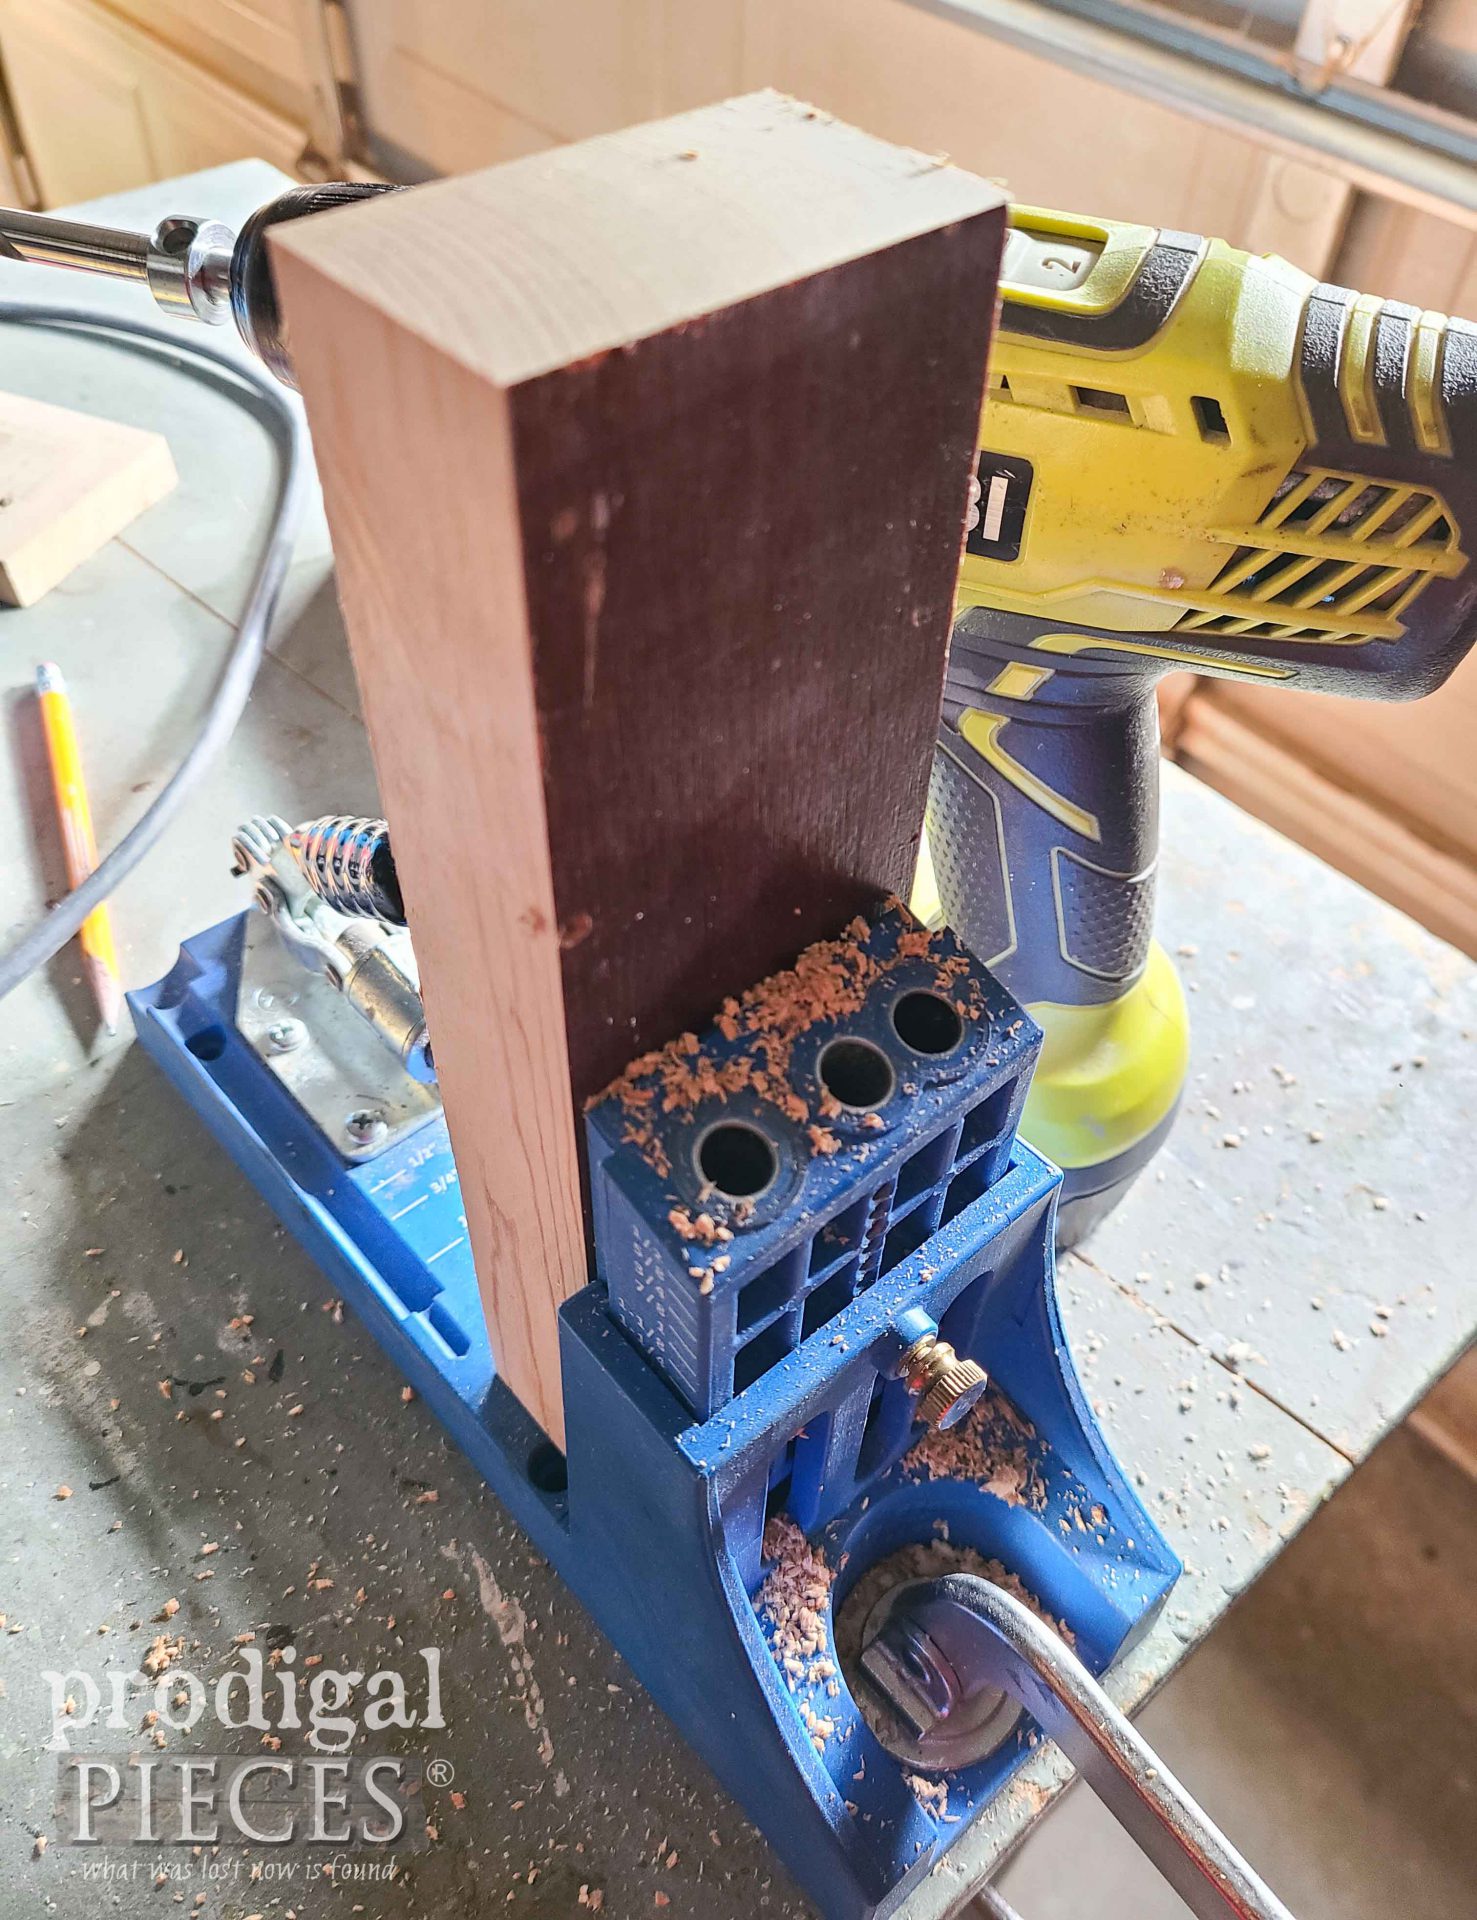 Pocket Hole Joints for Upcycled Spindle Storage Rack | prodigalpieces.com #prodigalpieces